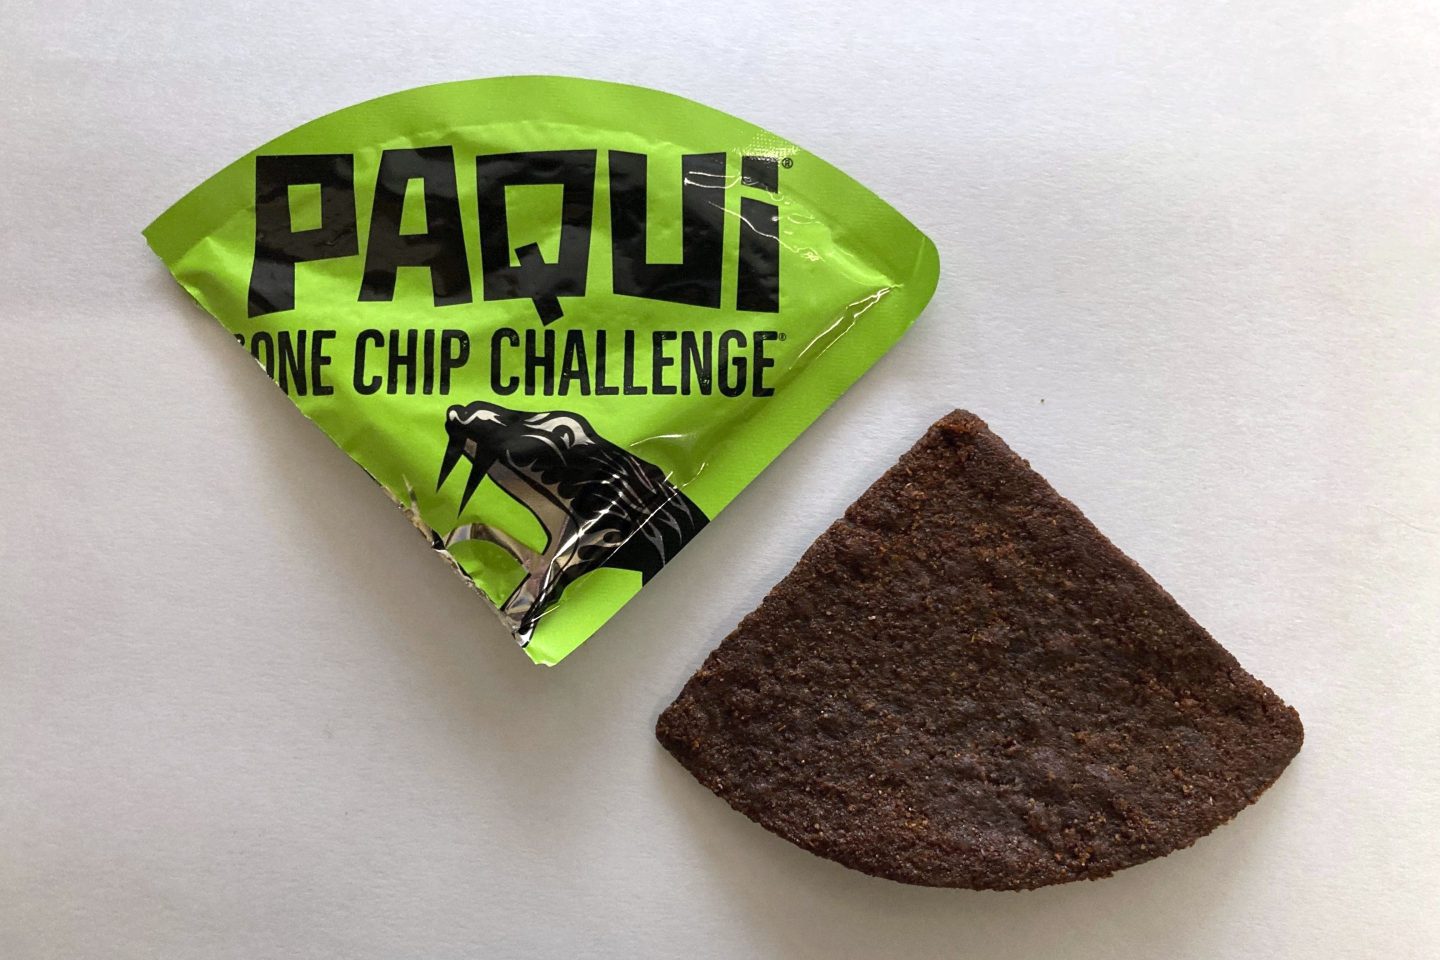 FILE &#8211; A Paqui One Chip Challenge chip is displayed in Boston, Friday, Sept. 8, 2023.  A medical examiner says a Massachusetts teen who participated in a spicy tortilla chip challenge died from ingesting a substance “with a high capsaicin concentration,” according to autopsy results The Associated Press obtained late Wednesday, May 15, 2024. Capsaicin is a chili pepper extract. Harris Wolobah died on Sept. 1, 2023, after eating the chip. (AP Photo/Steve LeBlanc, File)